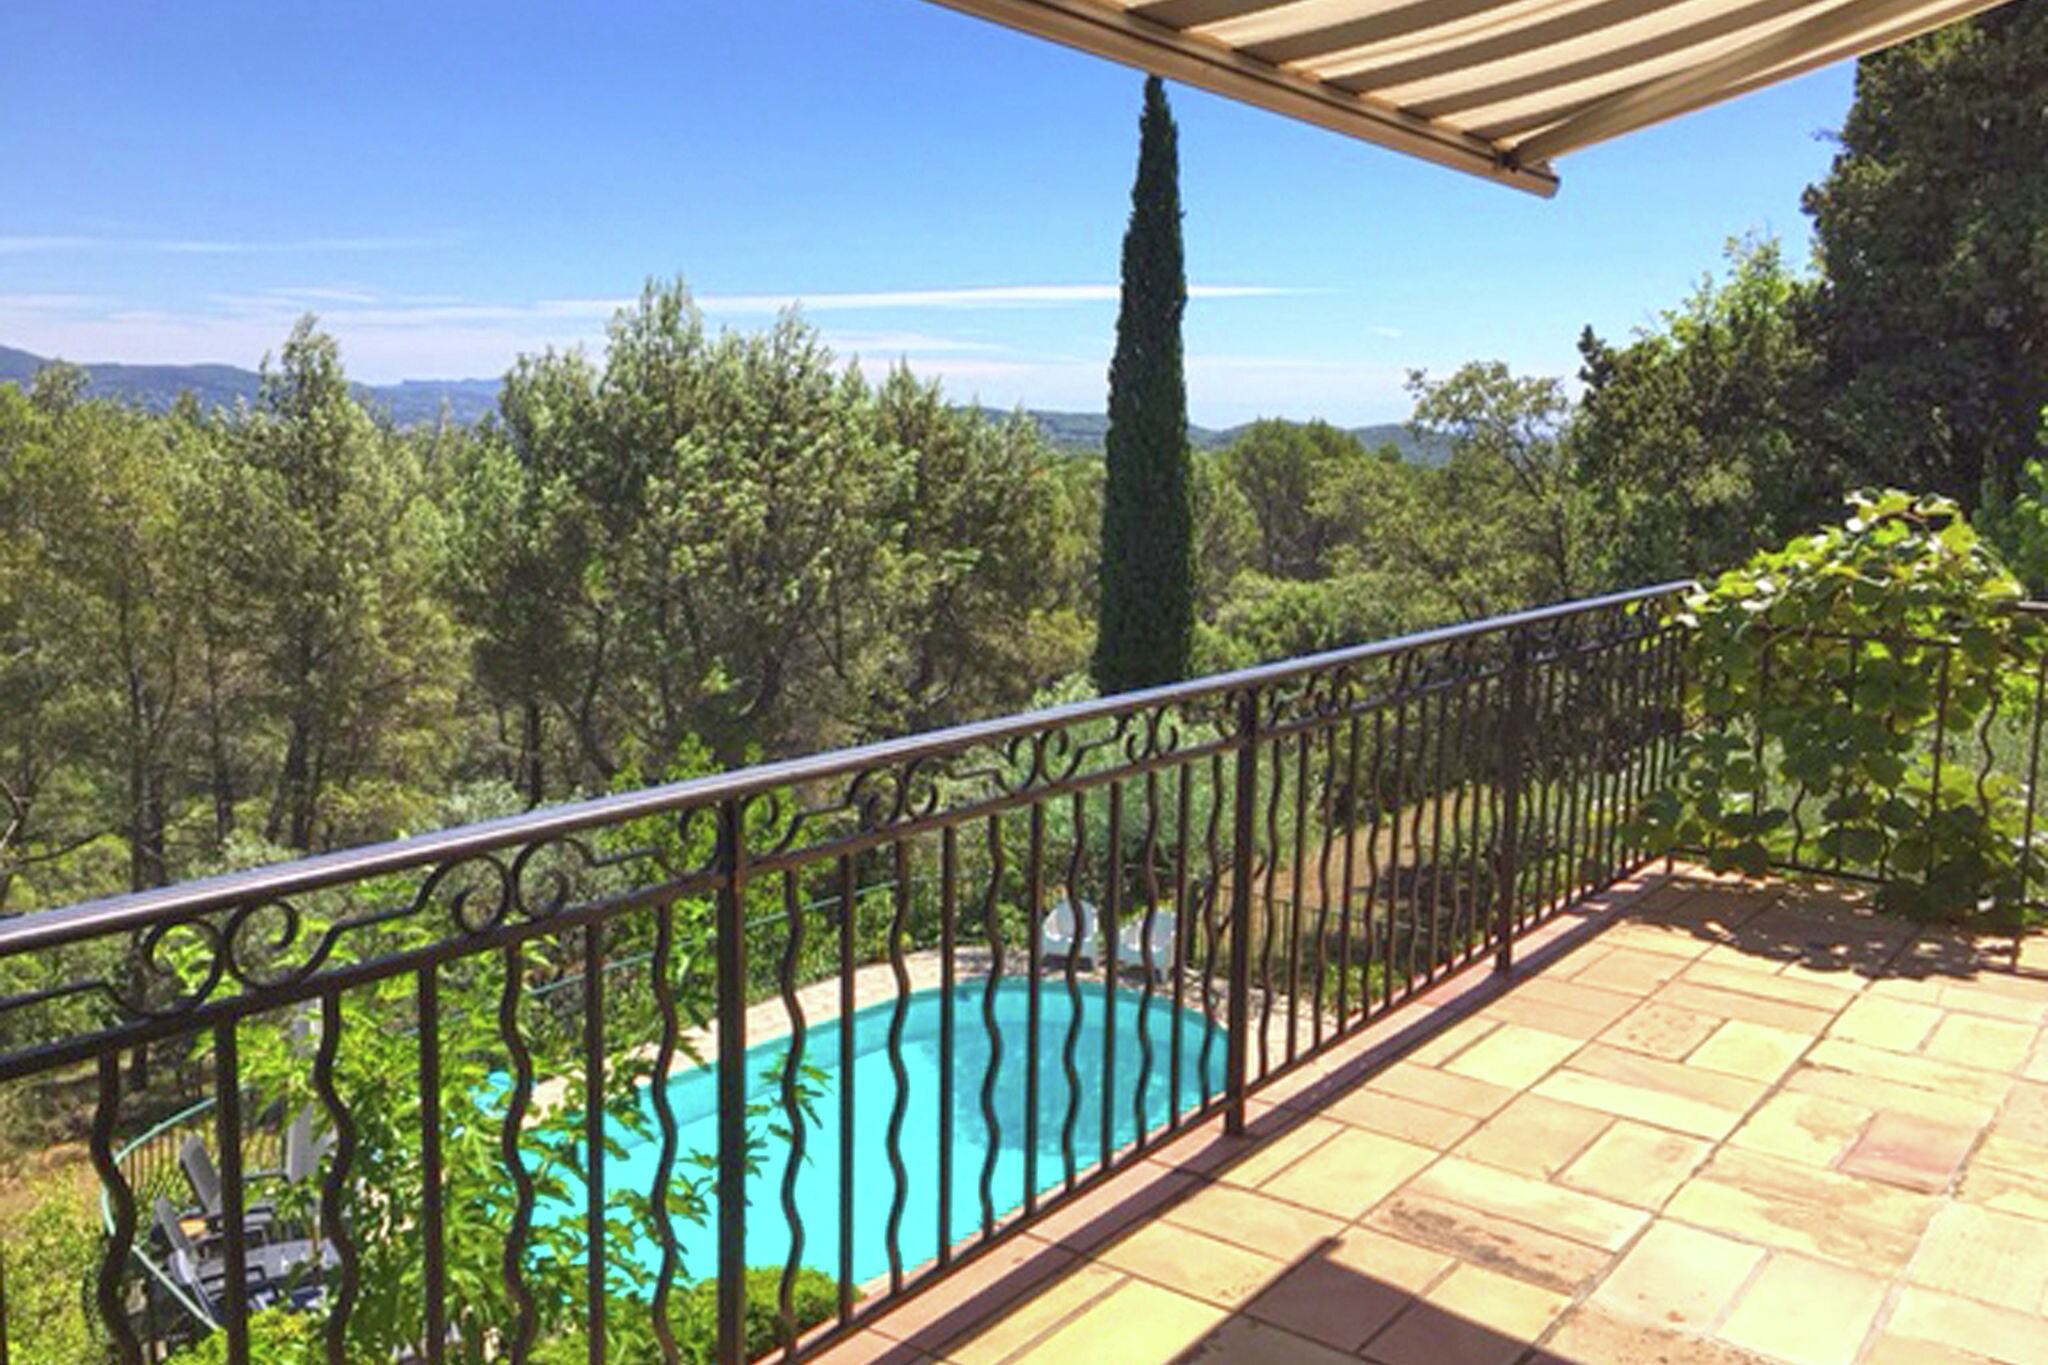 Provençal villa with private swimming pool, 900 m from the picturesque village of Flayosc